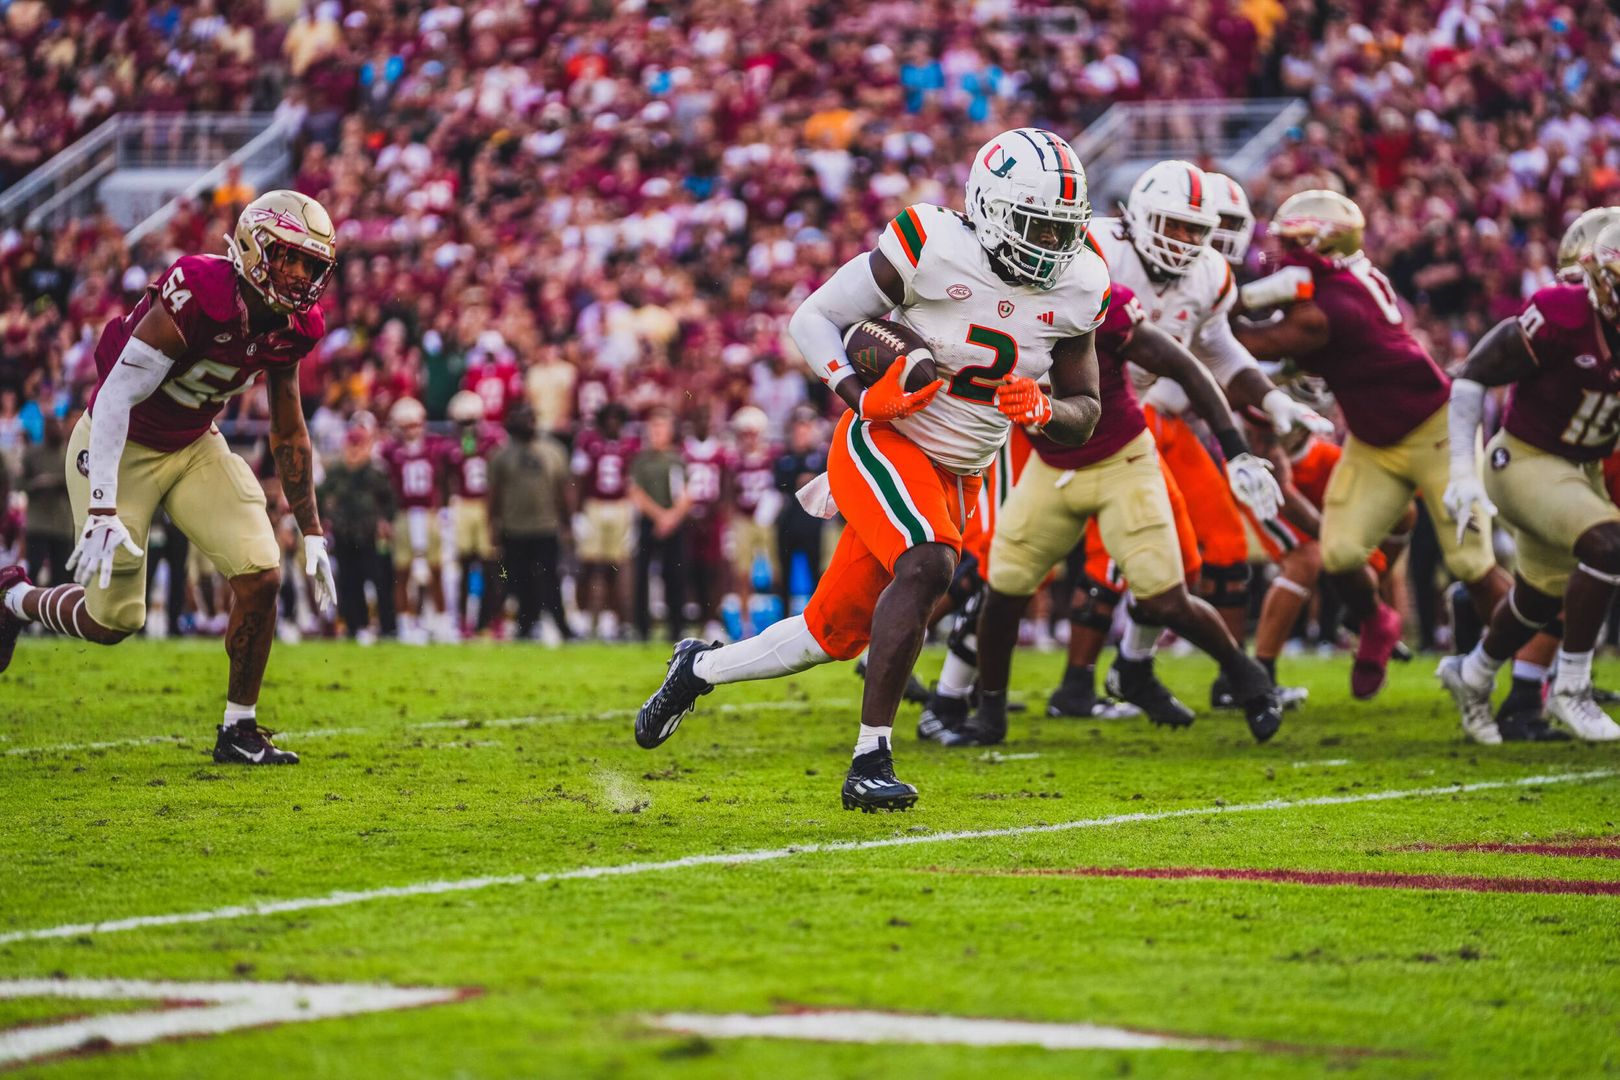 Canes Rewind: A Look Back at the Game Against Florida State